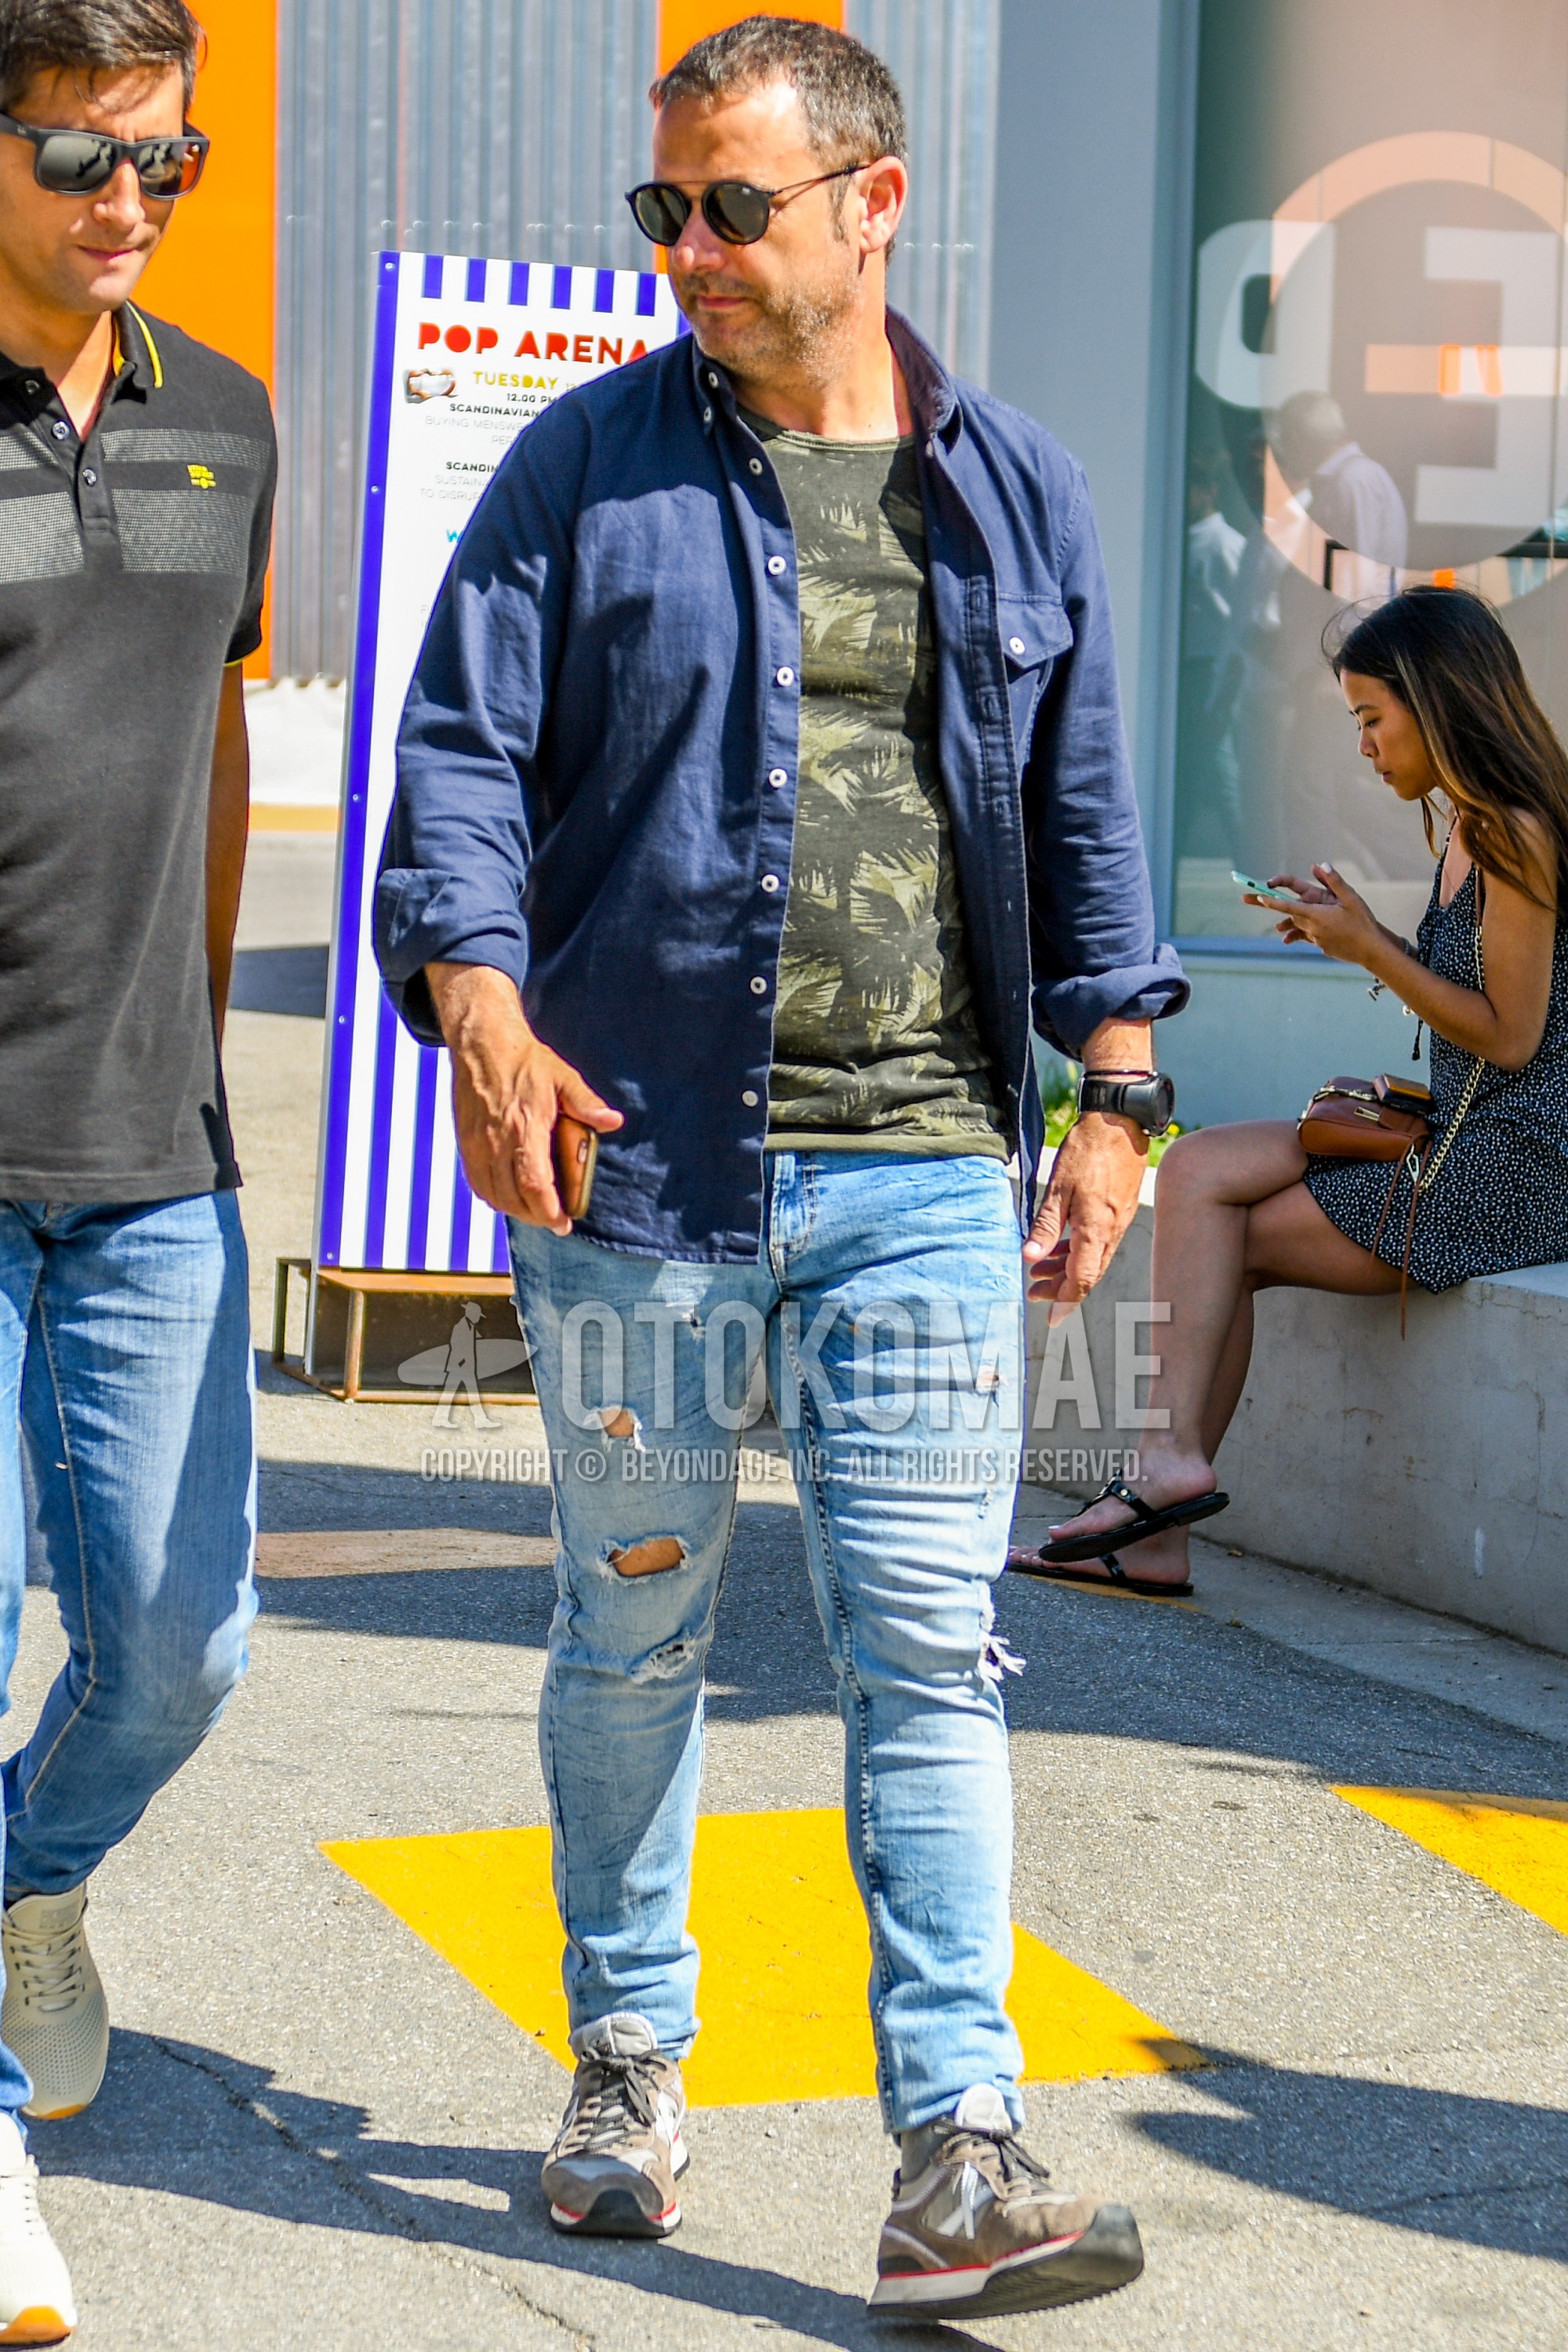 Men's spring summer outfit with plain sunglasses, navy plain shirt, olive green tops/innerwear t-shirt, blue plain denim/jeans, gray low-cut sneakers.